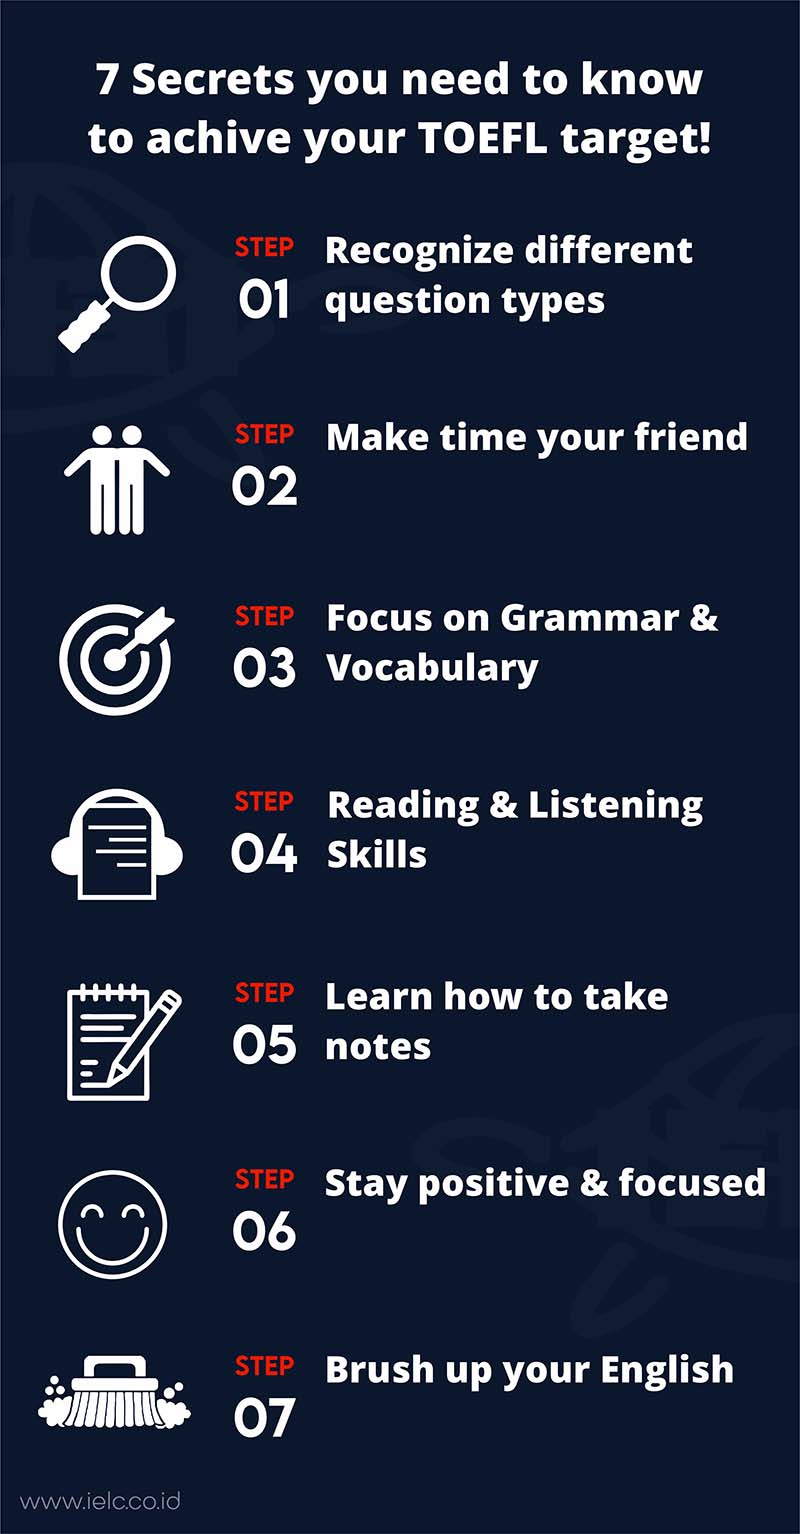 7 Secrets you need to know to achieve your TOEFL target!